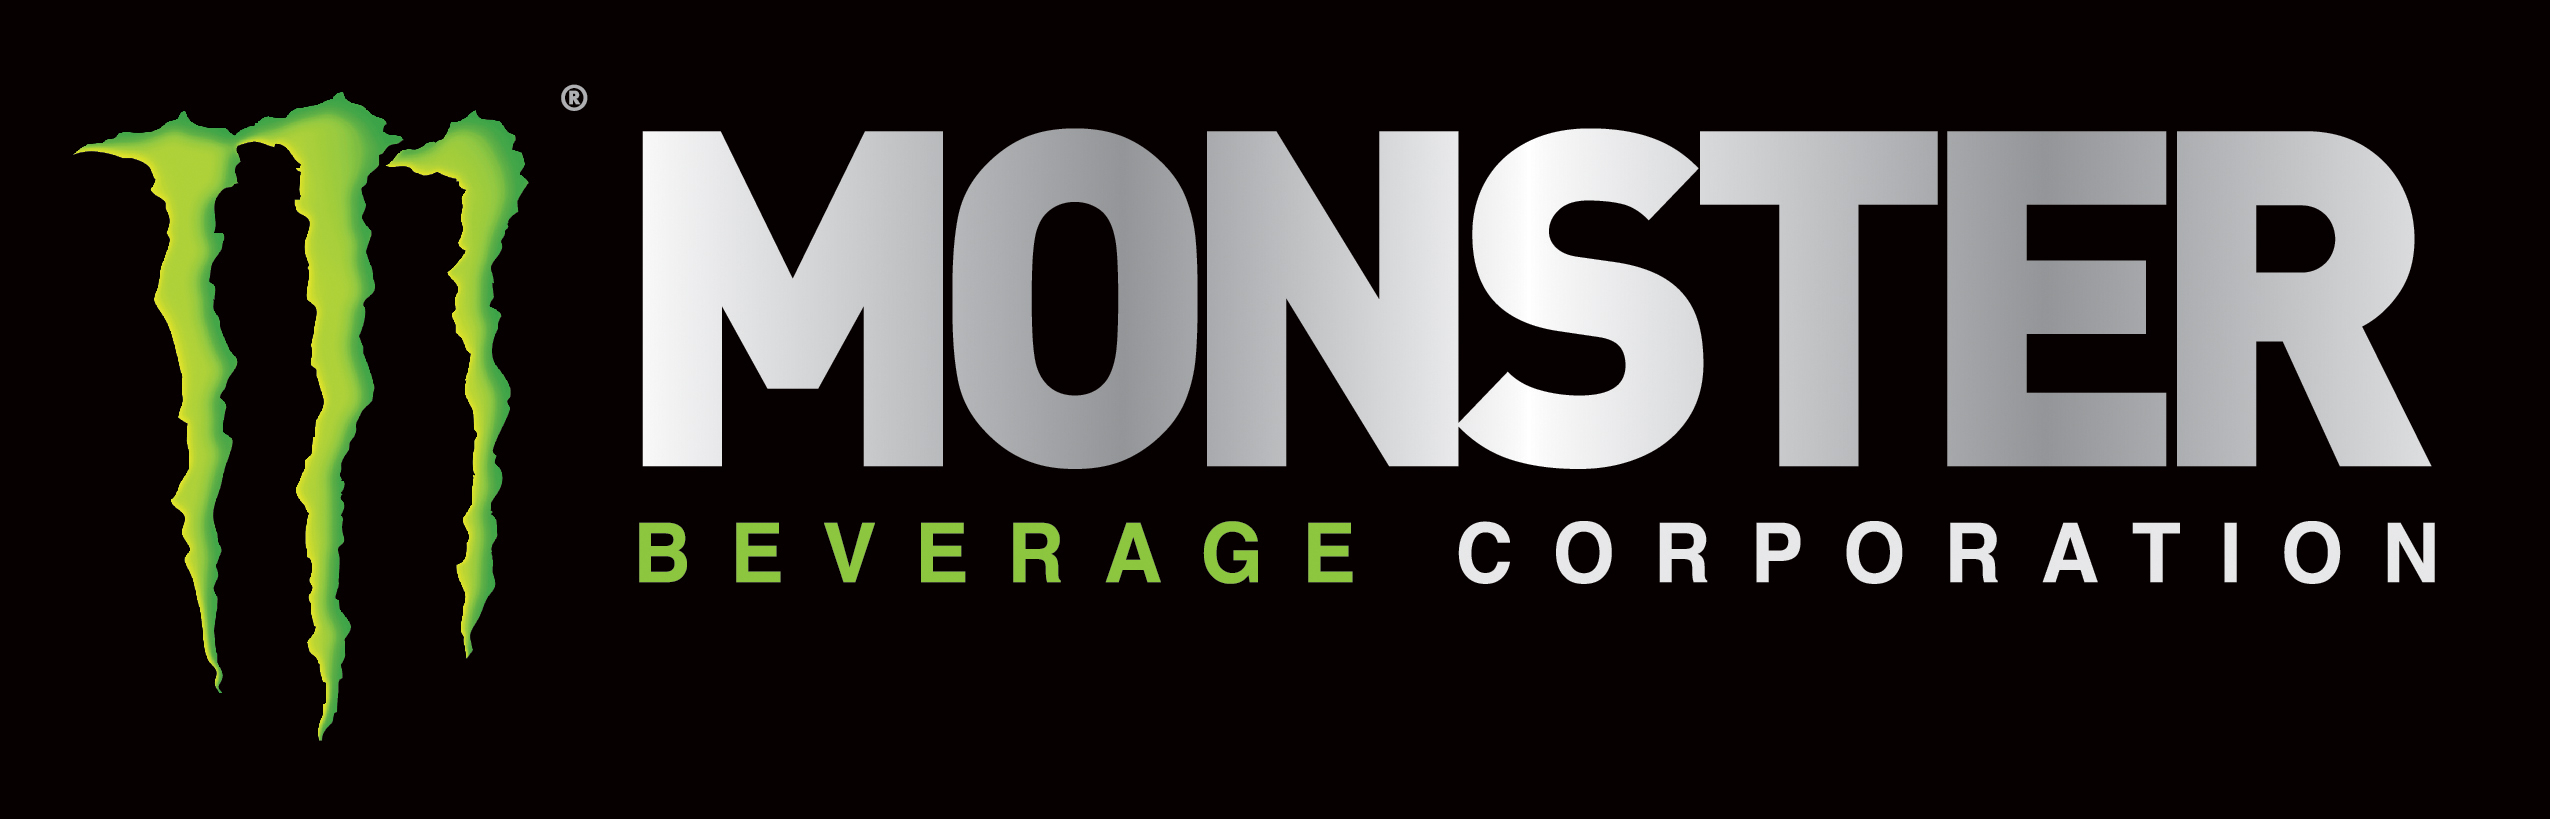 Power Brands - Beverage Consulting Firms, Beverage Consulting Services